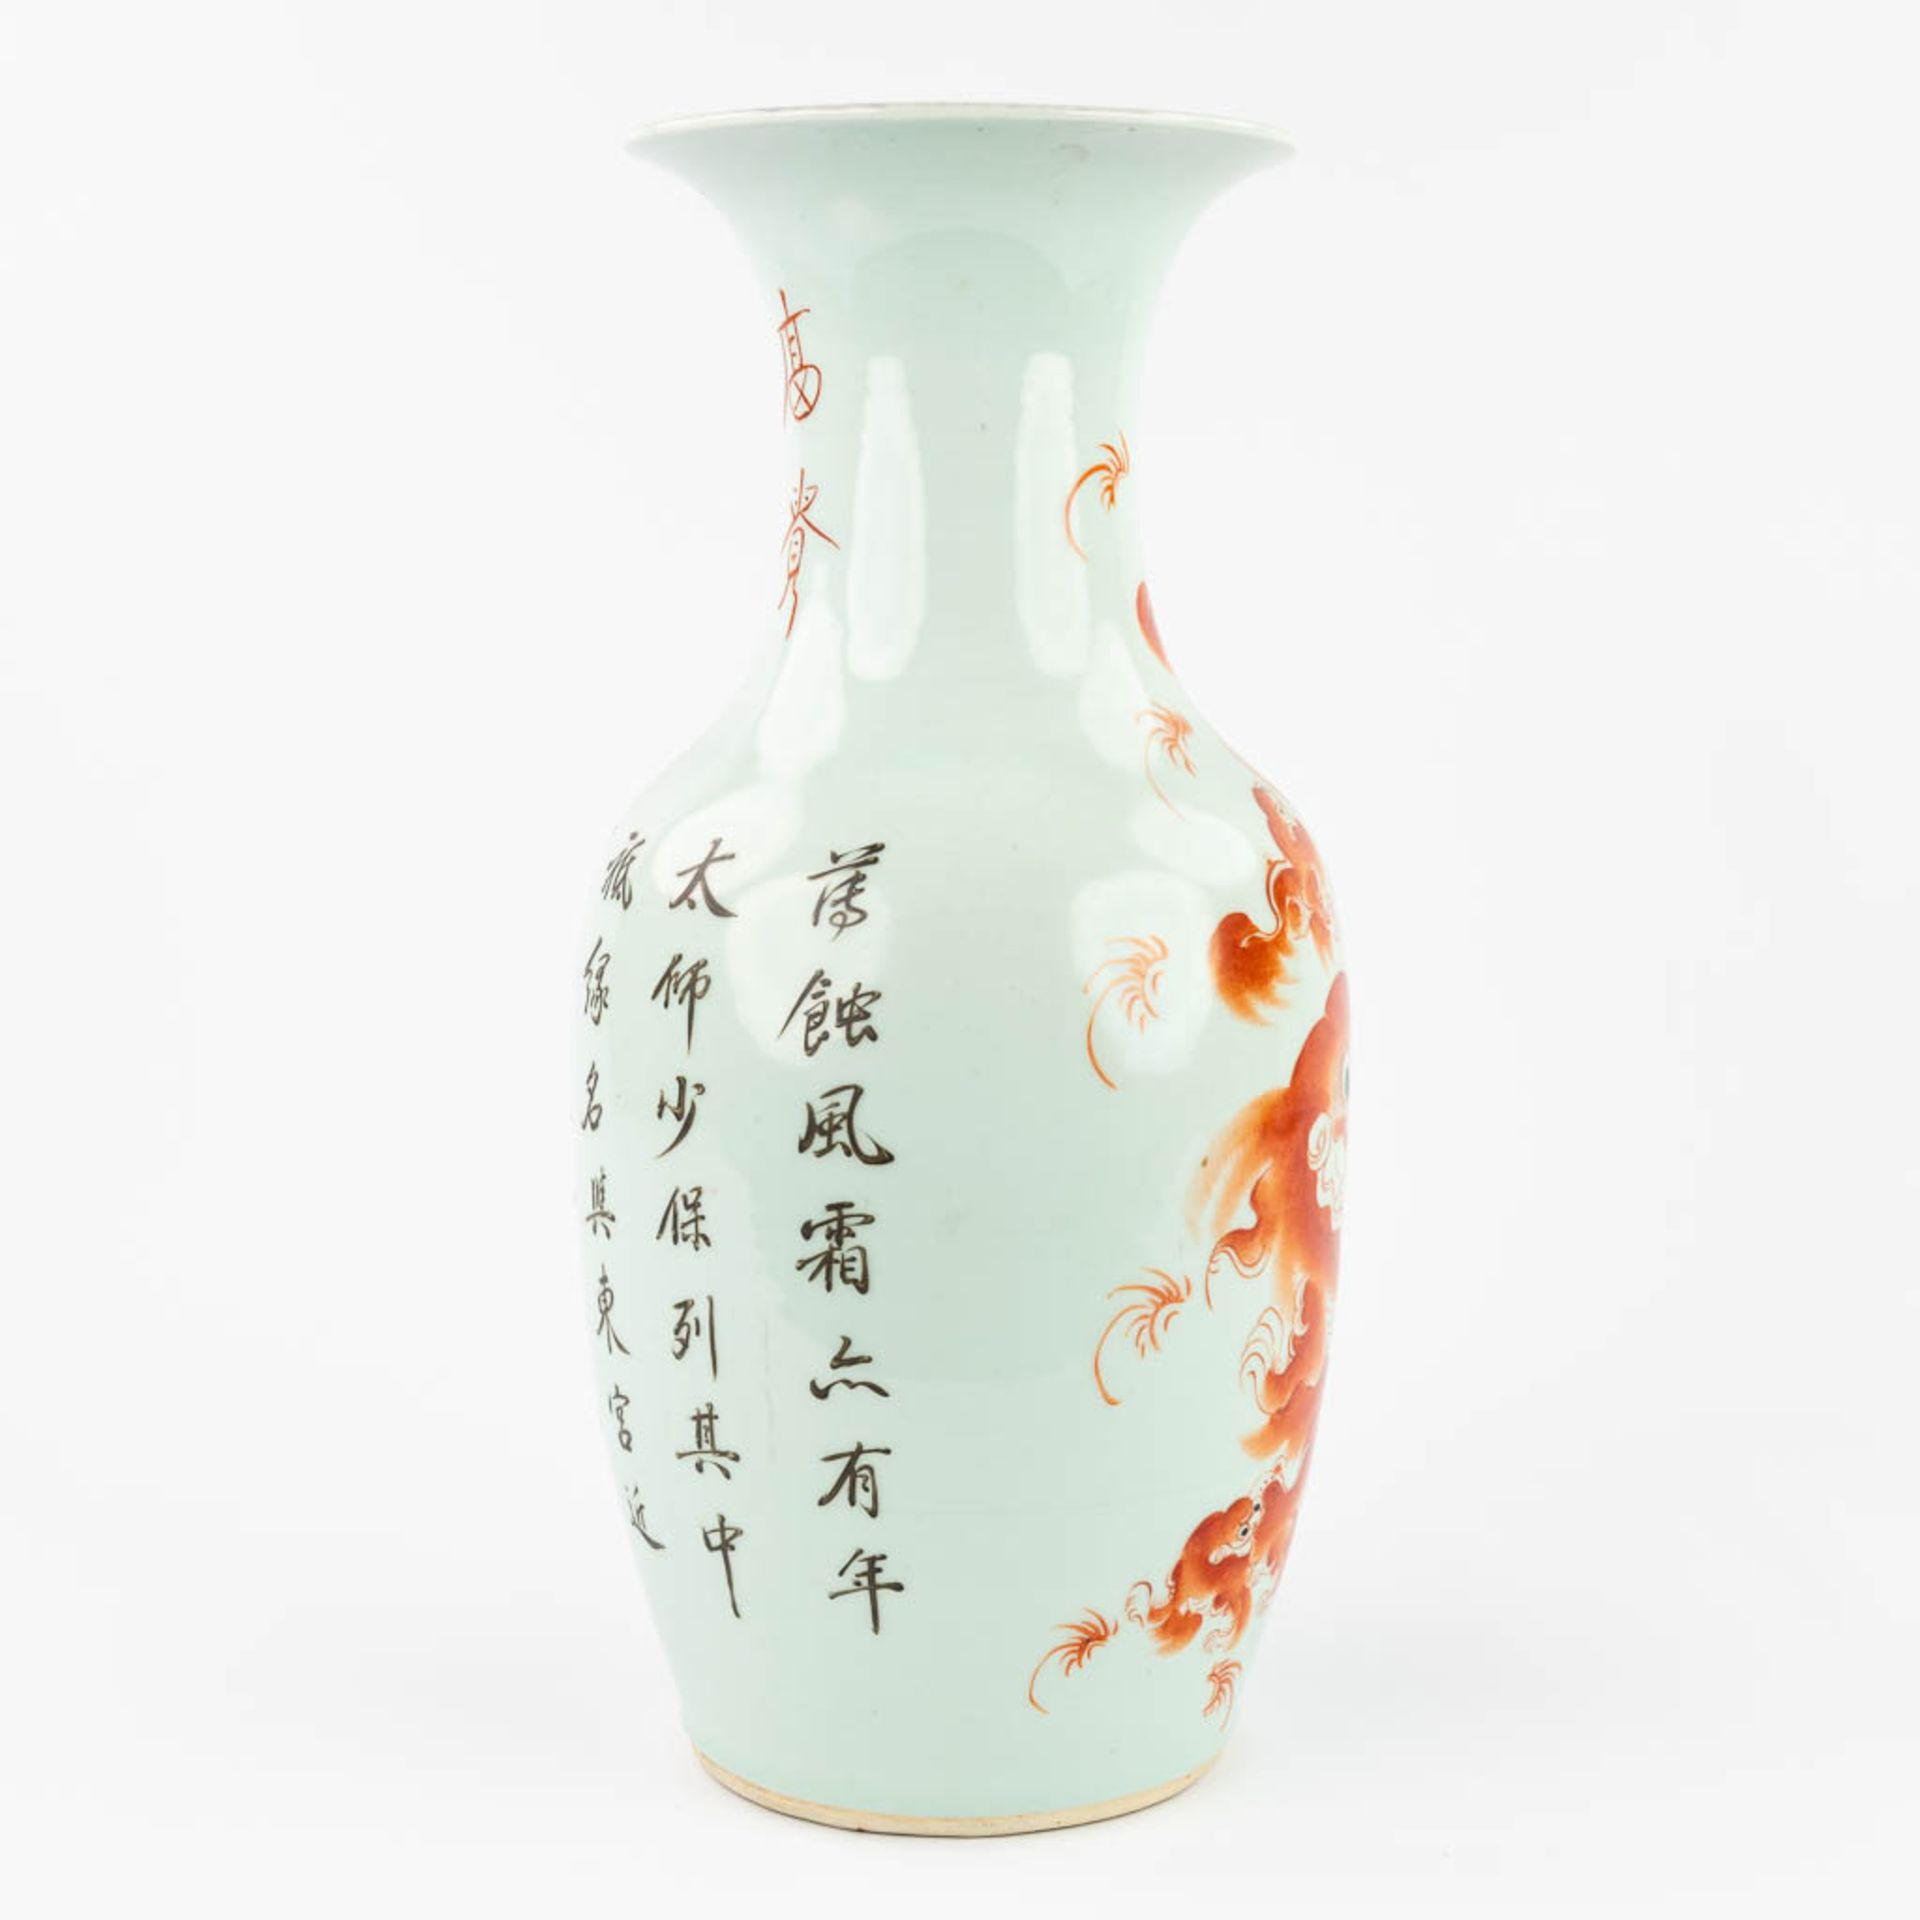 A Chinese vase made of porcelain and decorated with a red foo dog. (44,5 x 21 cm) - Image 5 of 16